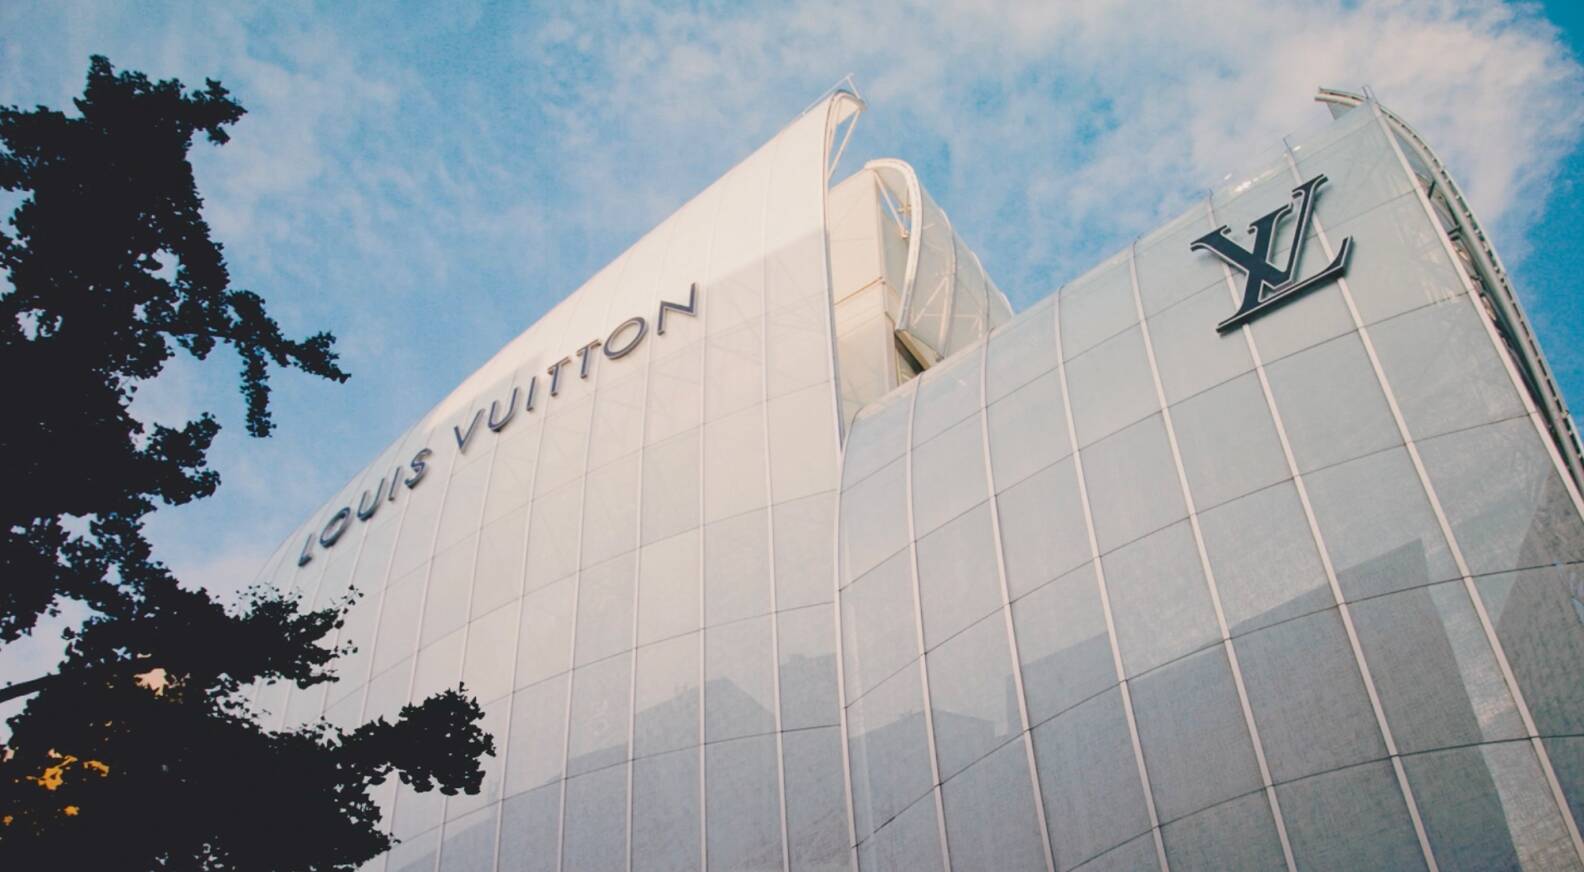 Louis Vuitton to transform Paris headquarters into its first-ever